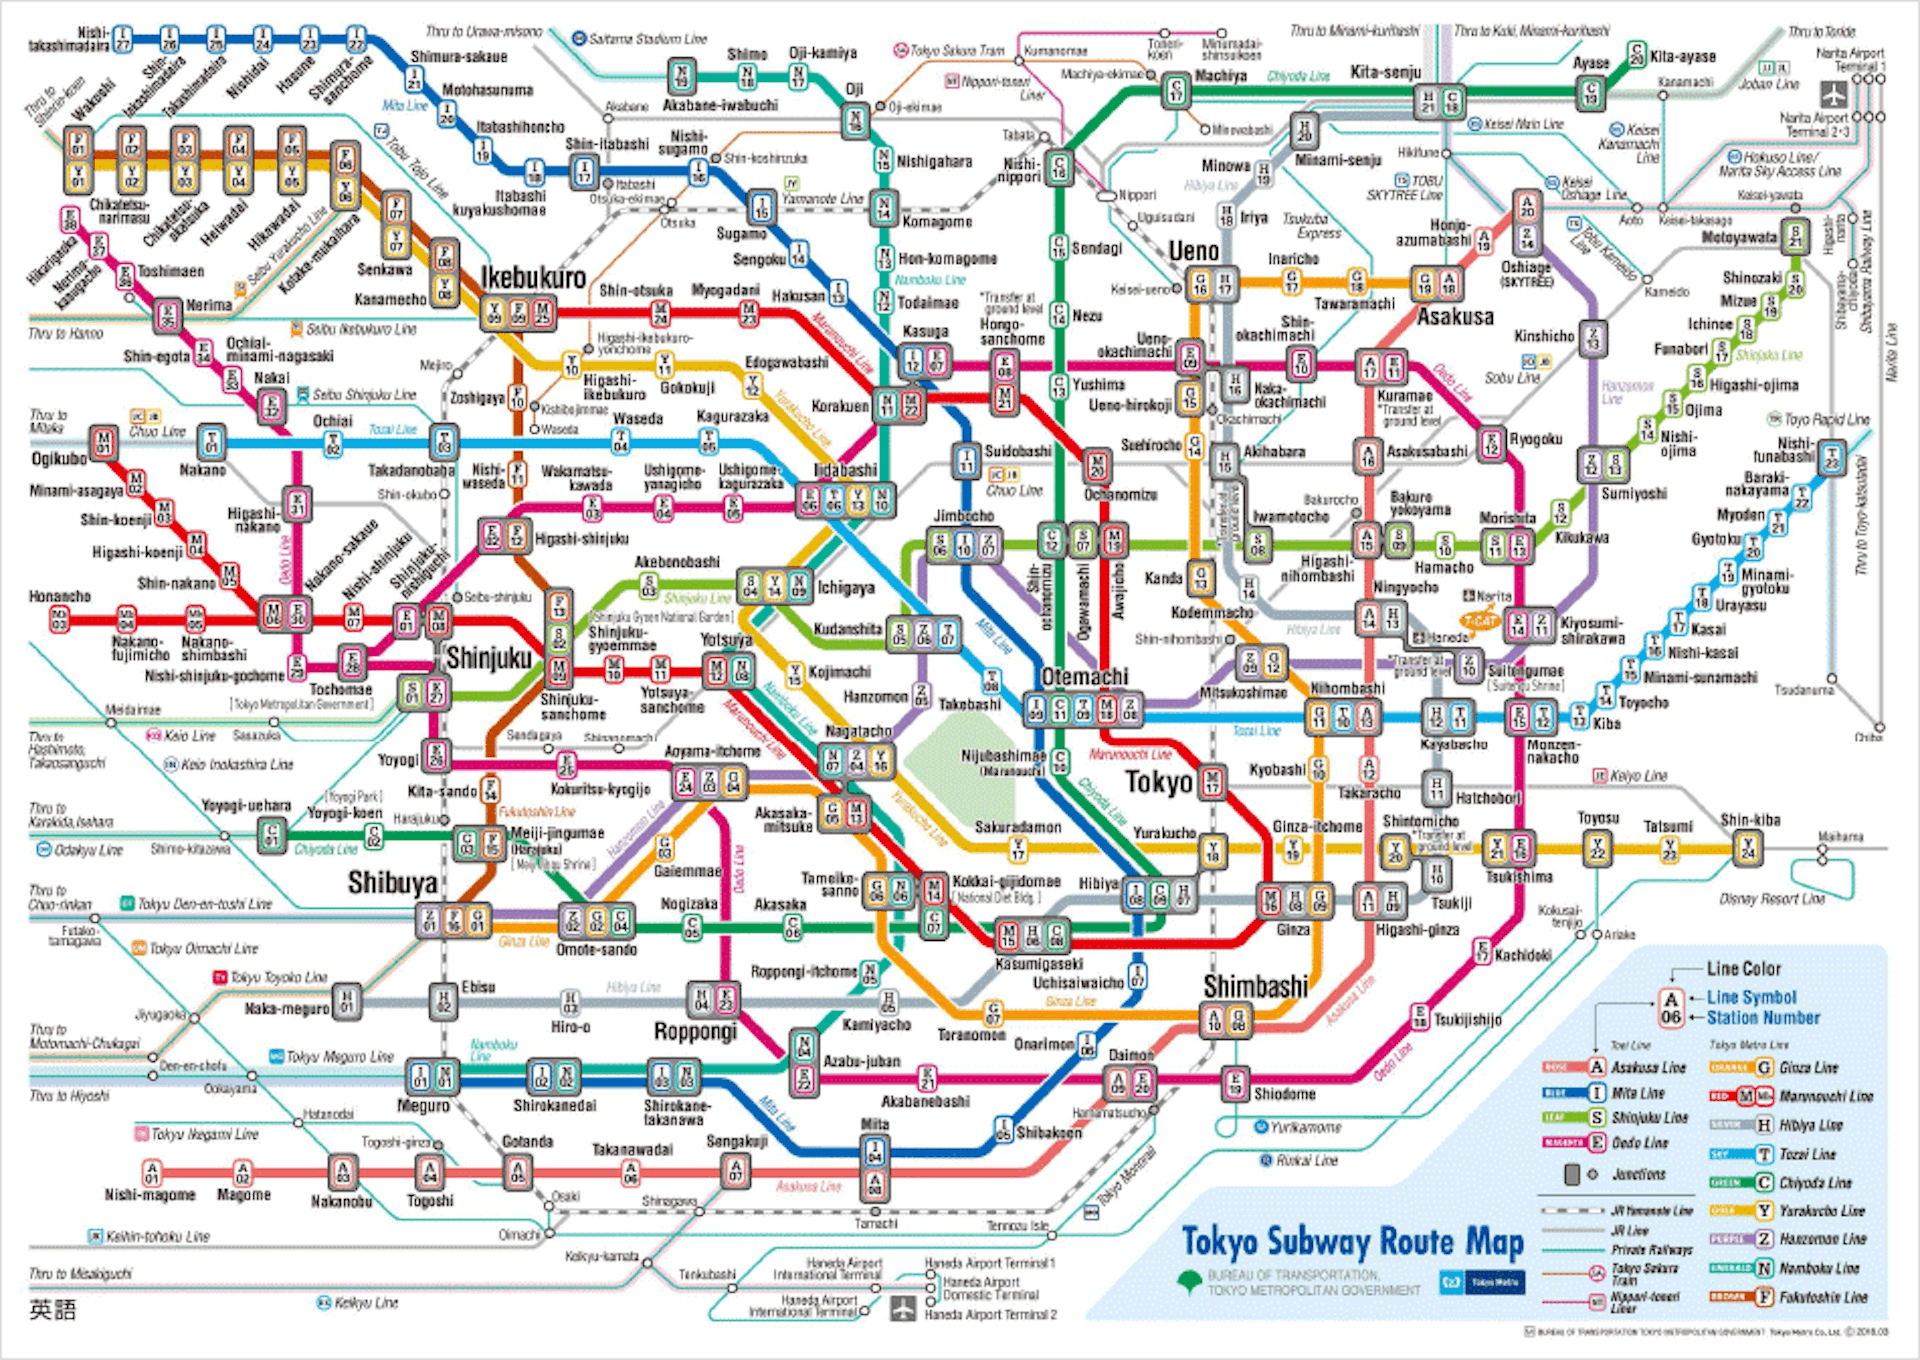 A map of the Tokyo metro